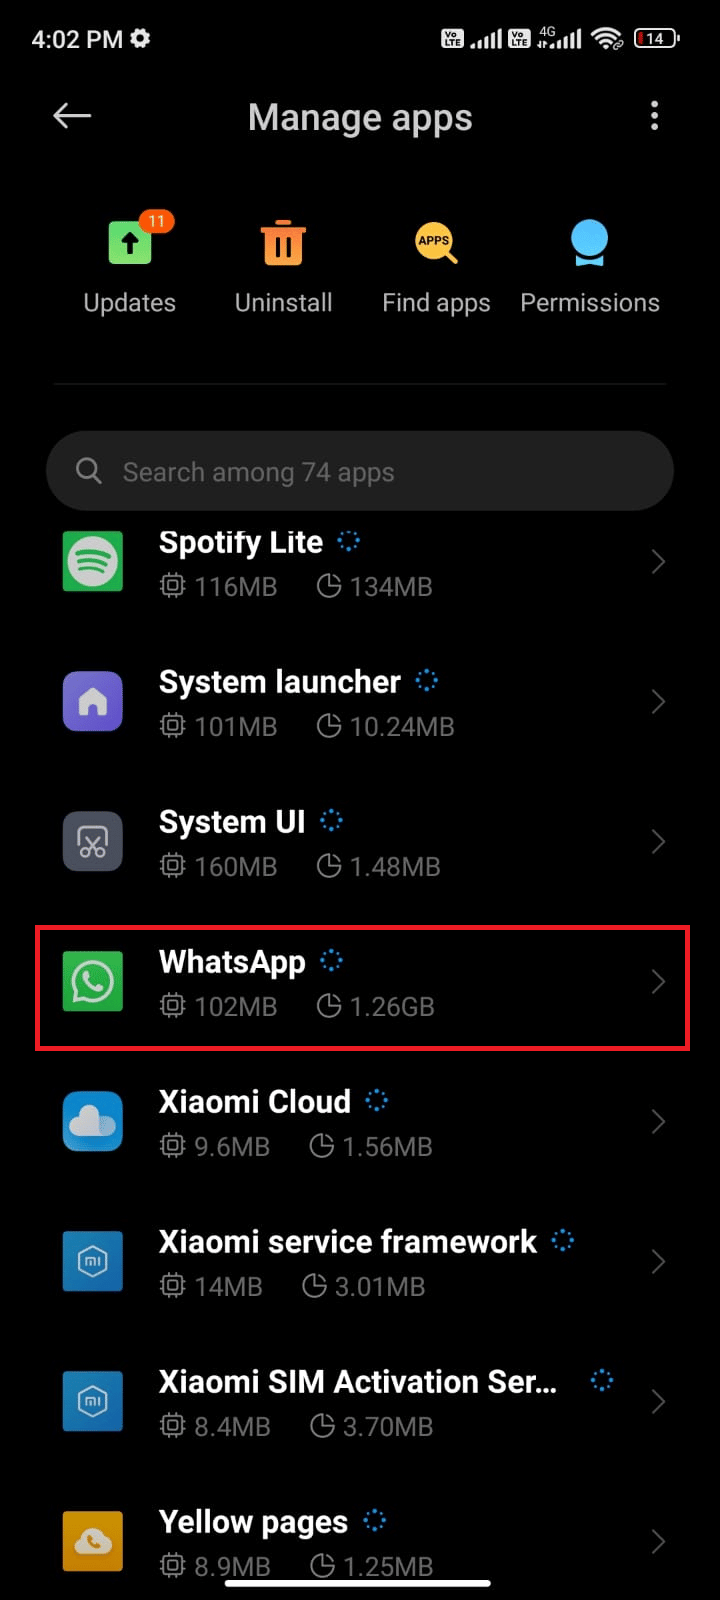 tap on Manage apps followed by WhatsApp 